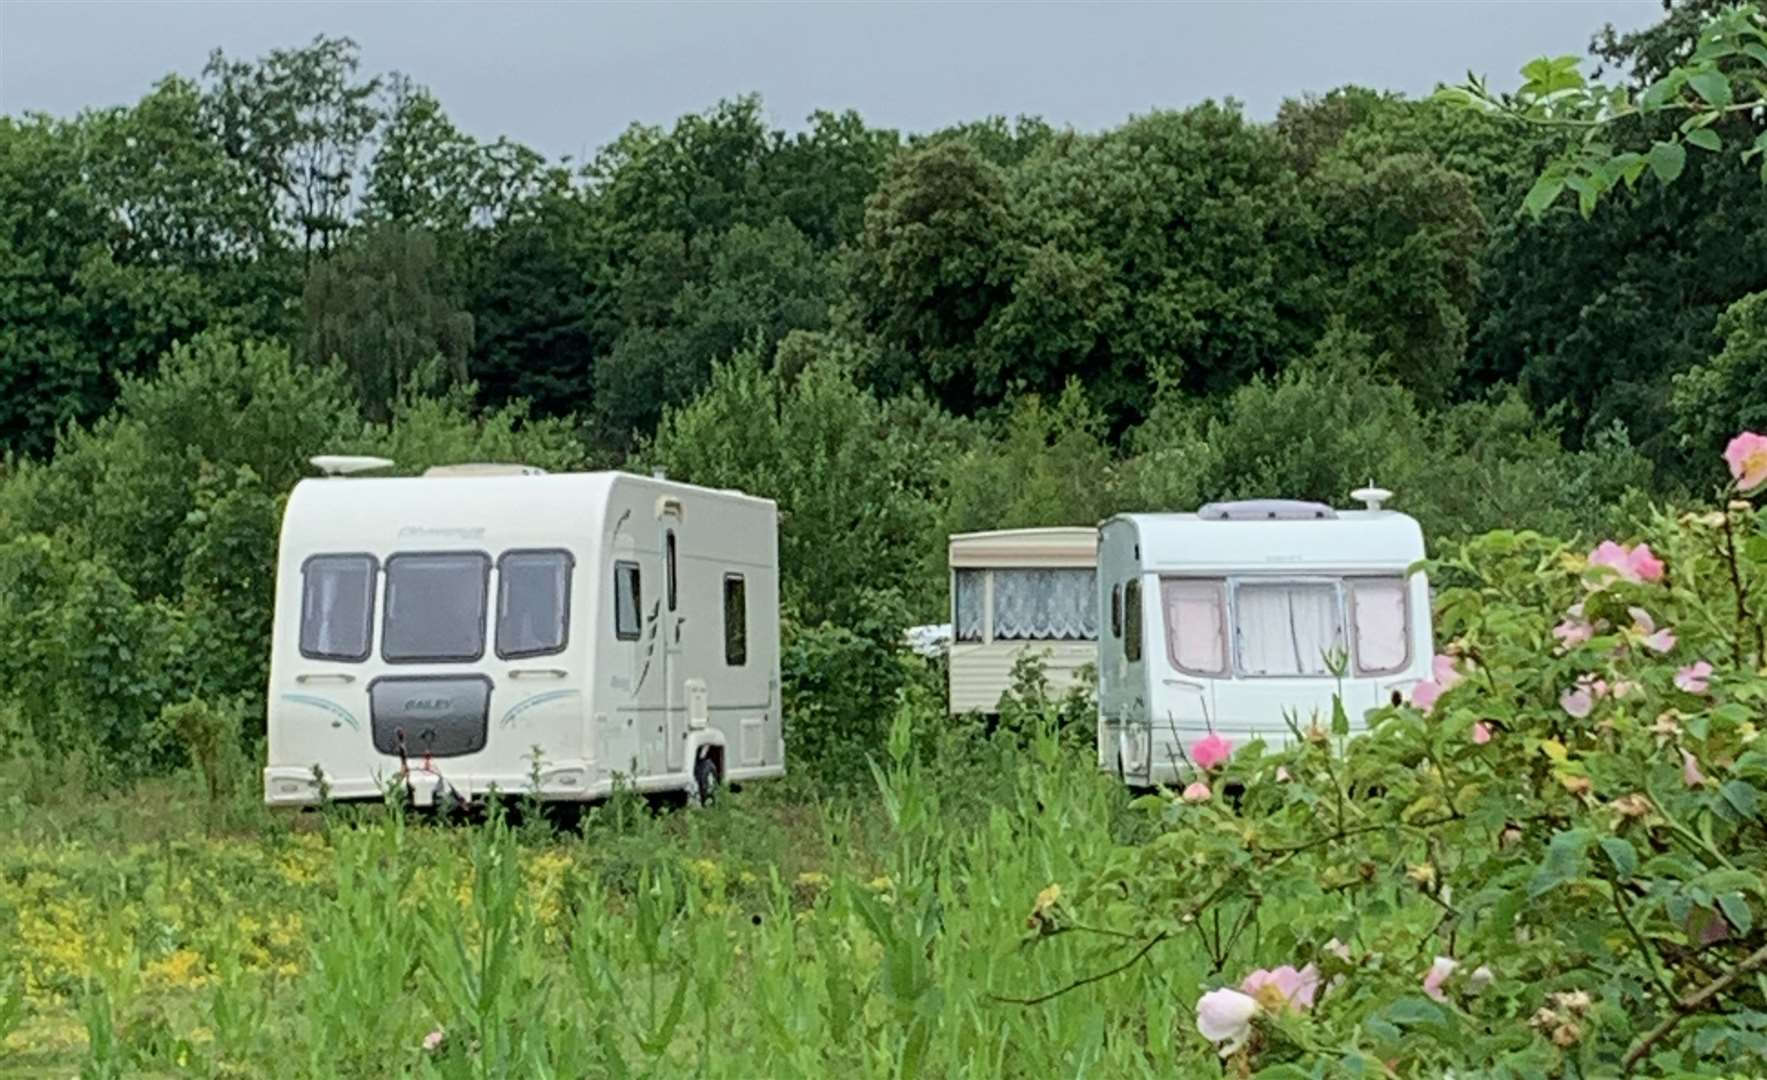 Caravans and mobiles homes have been moved onto a site off Birling Road, Leybourne